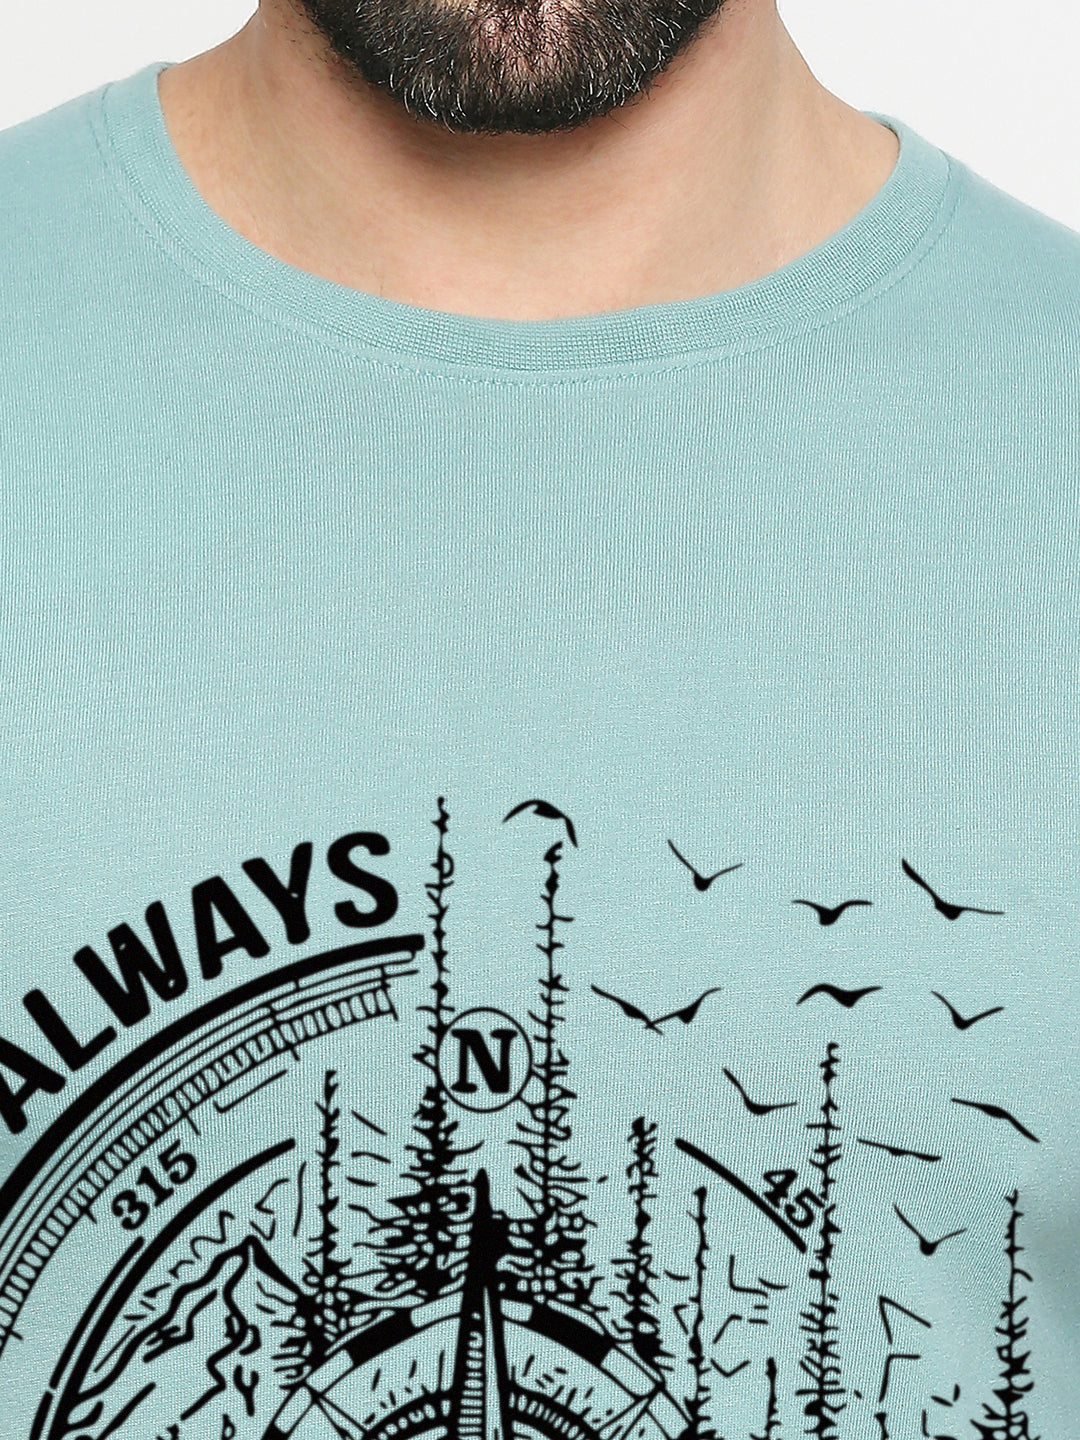 Always Take the Scenic Route T-Shirt